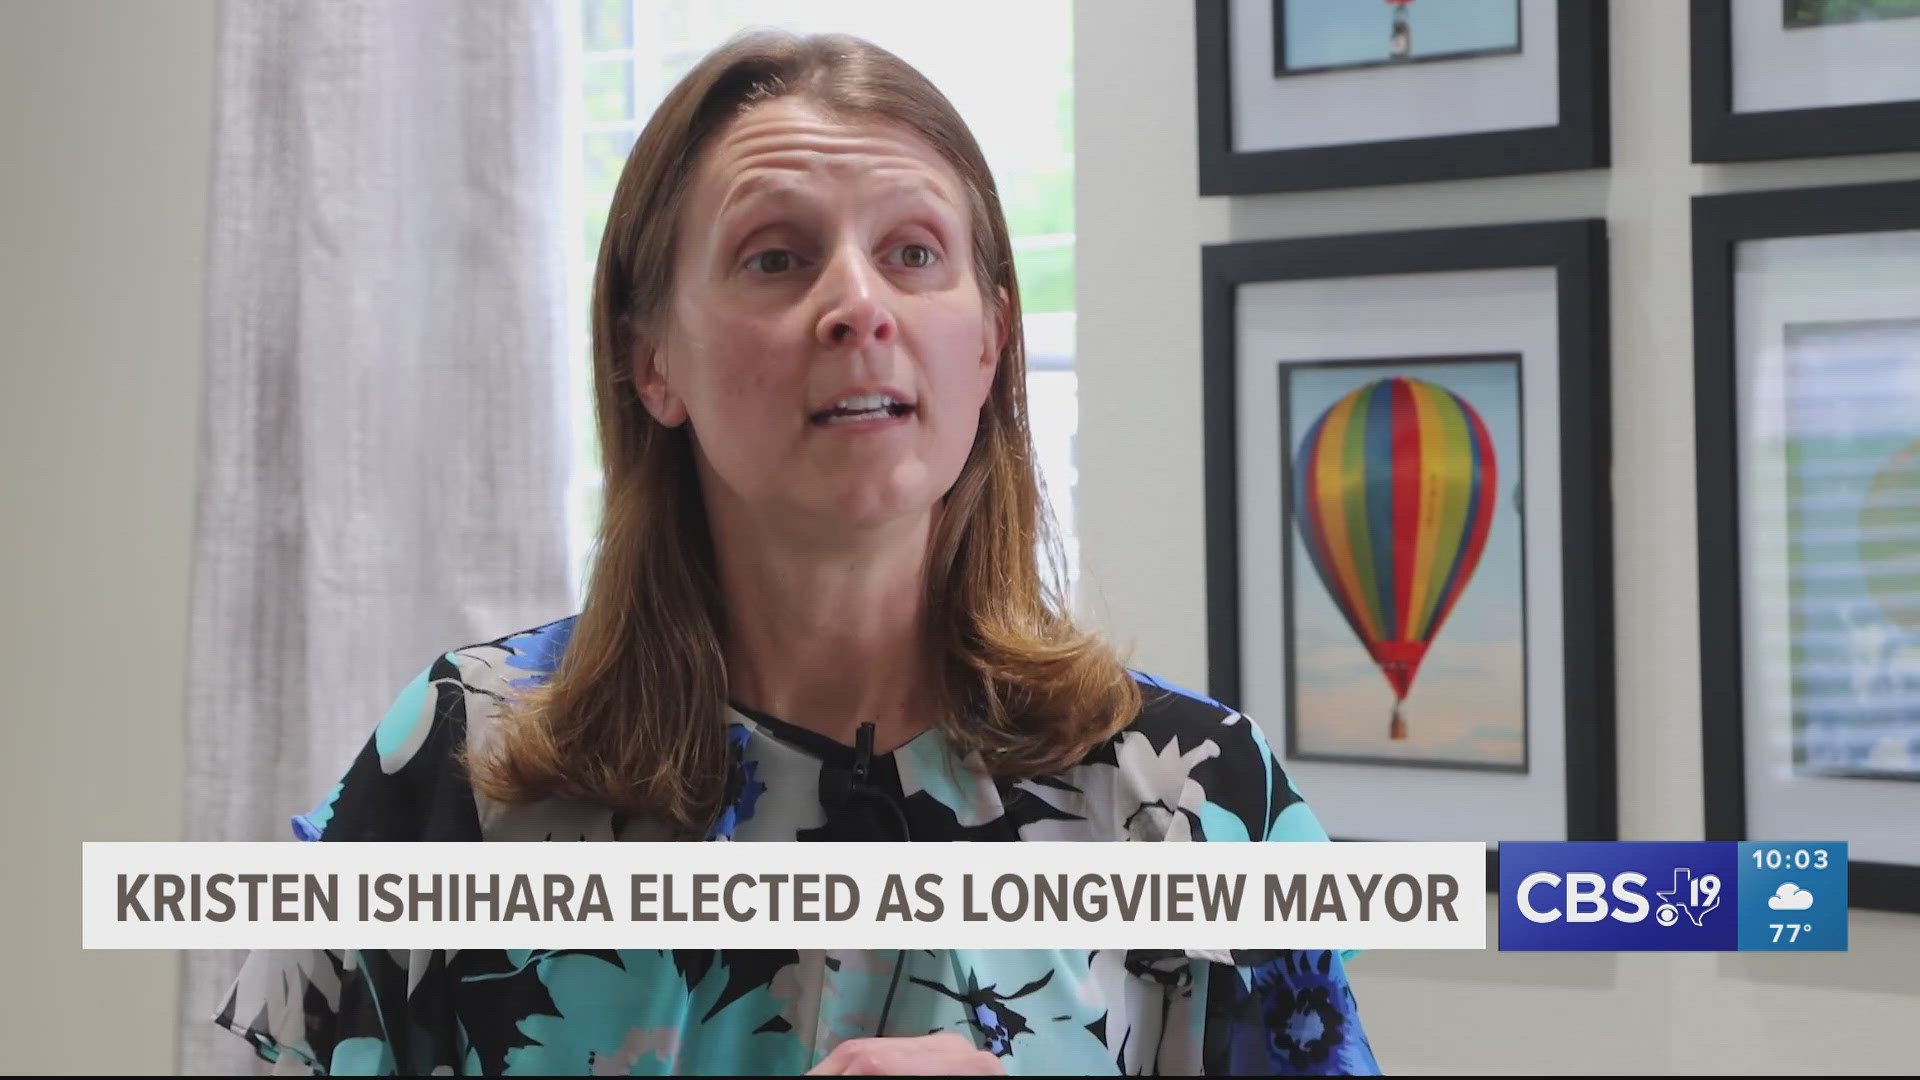 This is the first time that Longview has a new mayor since Andy Mack took office in 2015 after he reached his maximum three-year, three-terms limit.